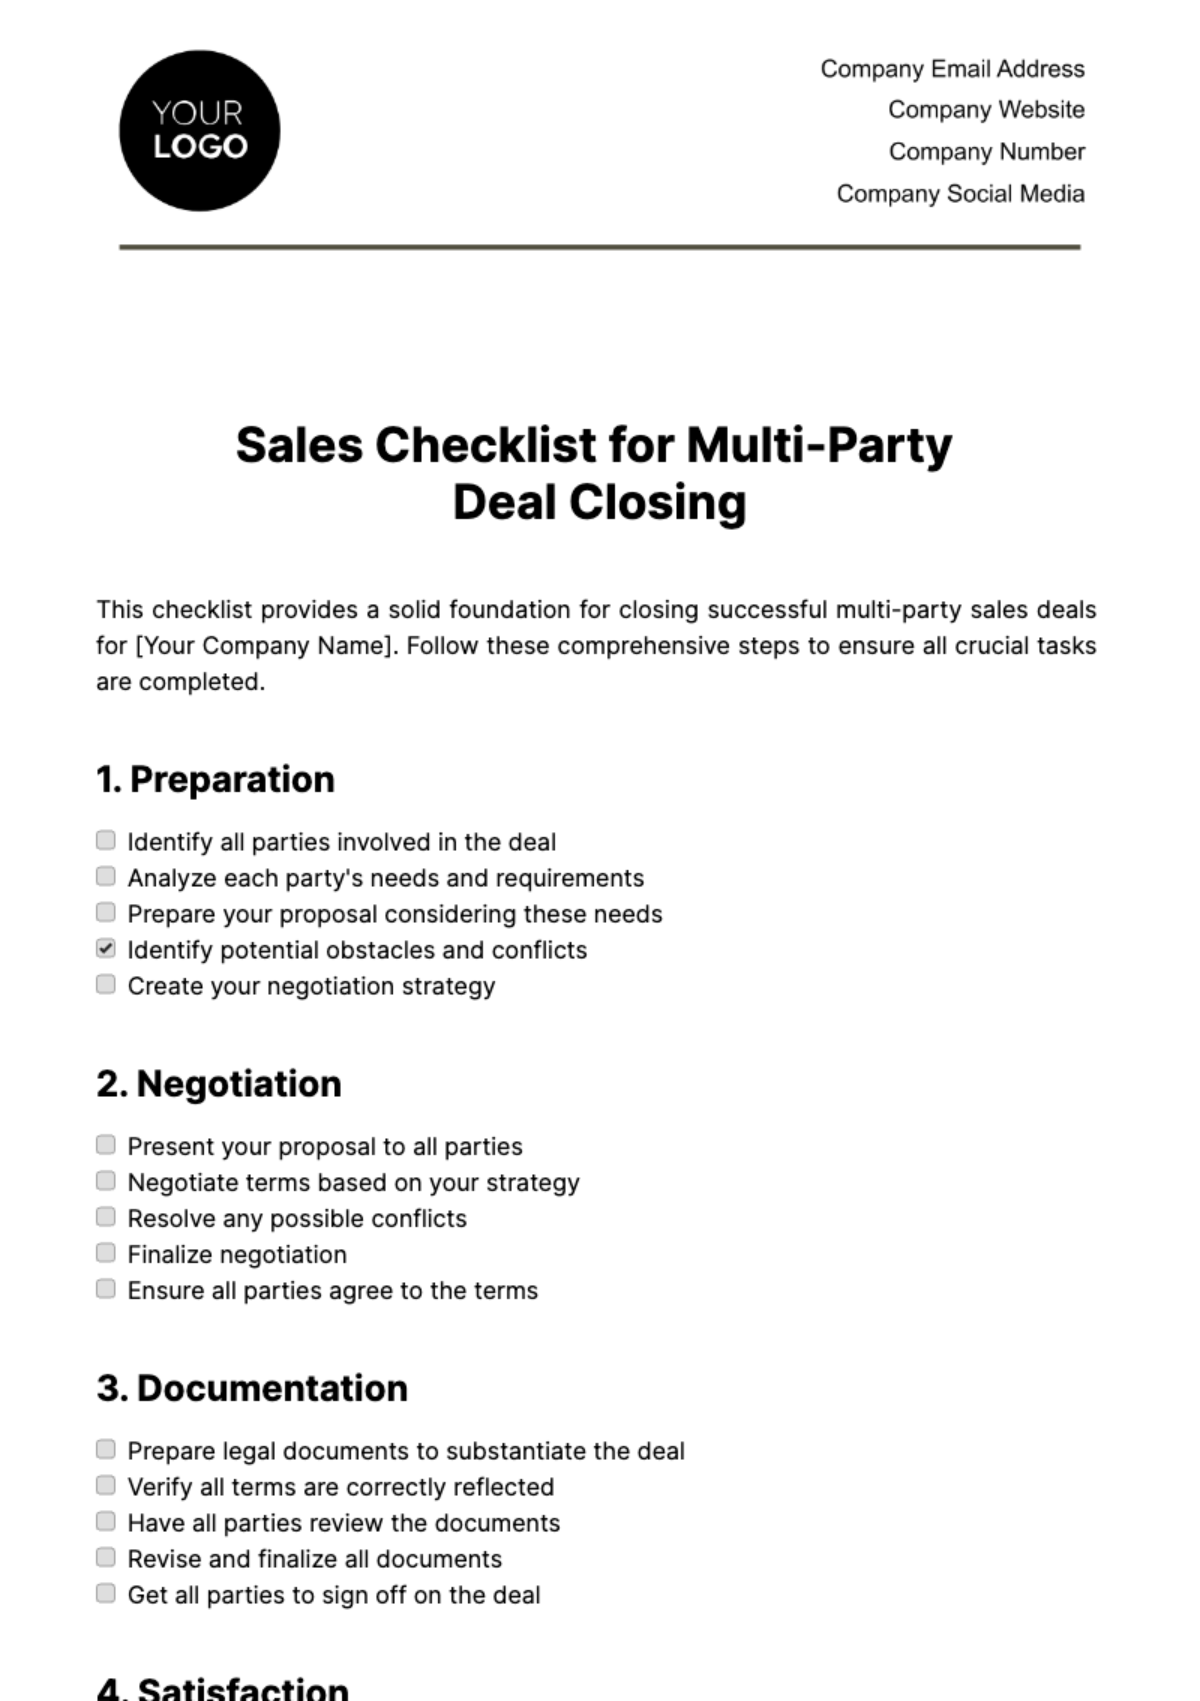 Free Sales Checklist for Multi-Party Deal Closing Template